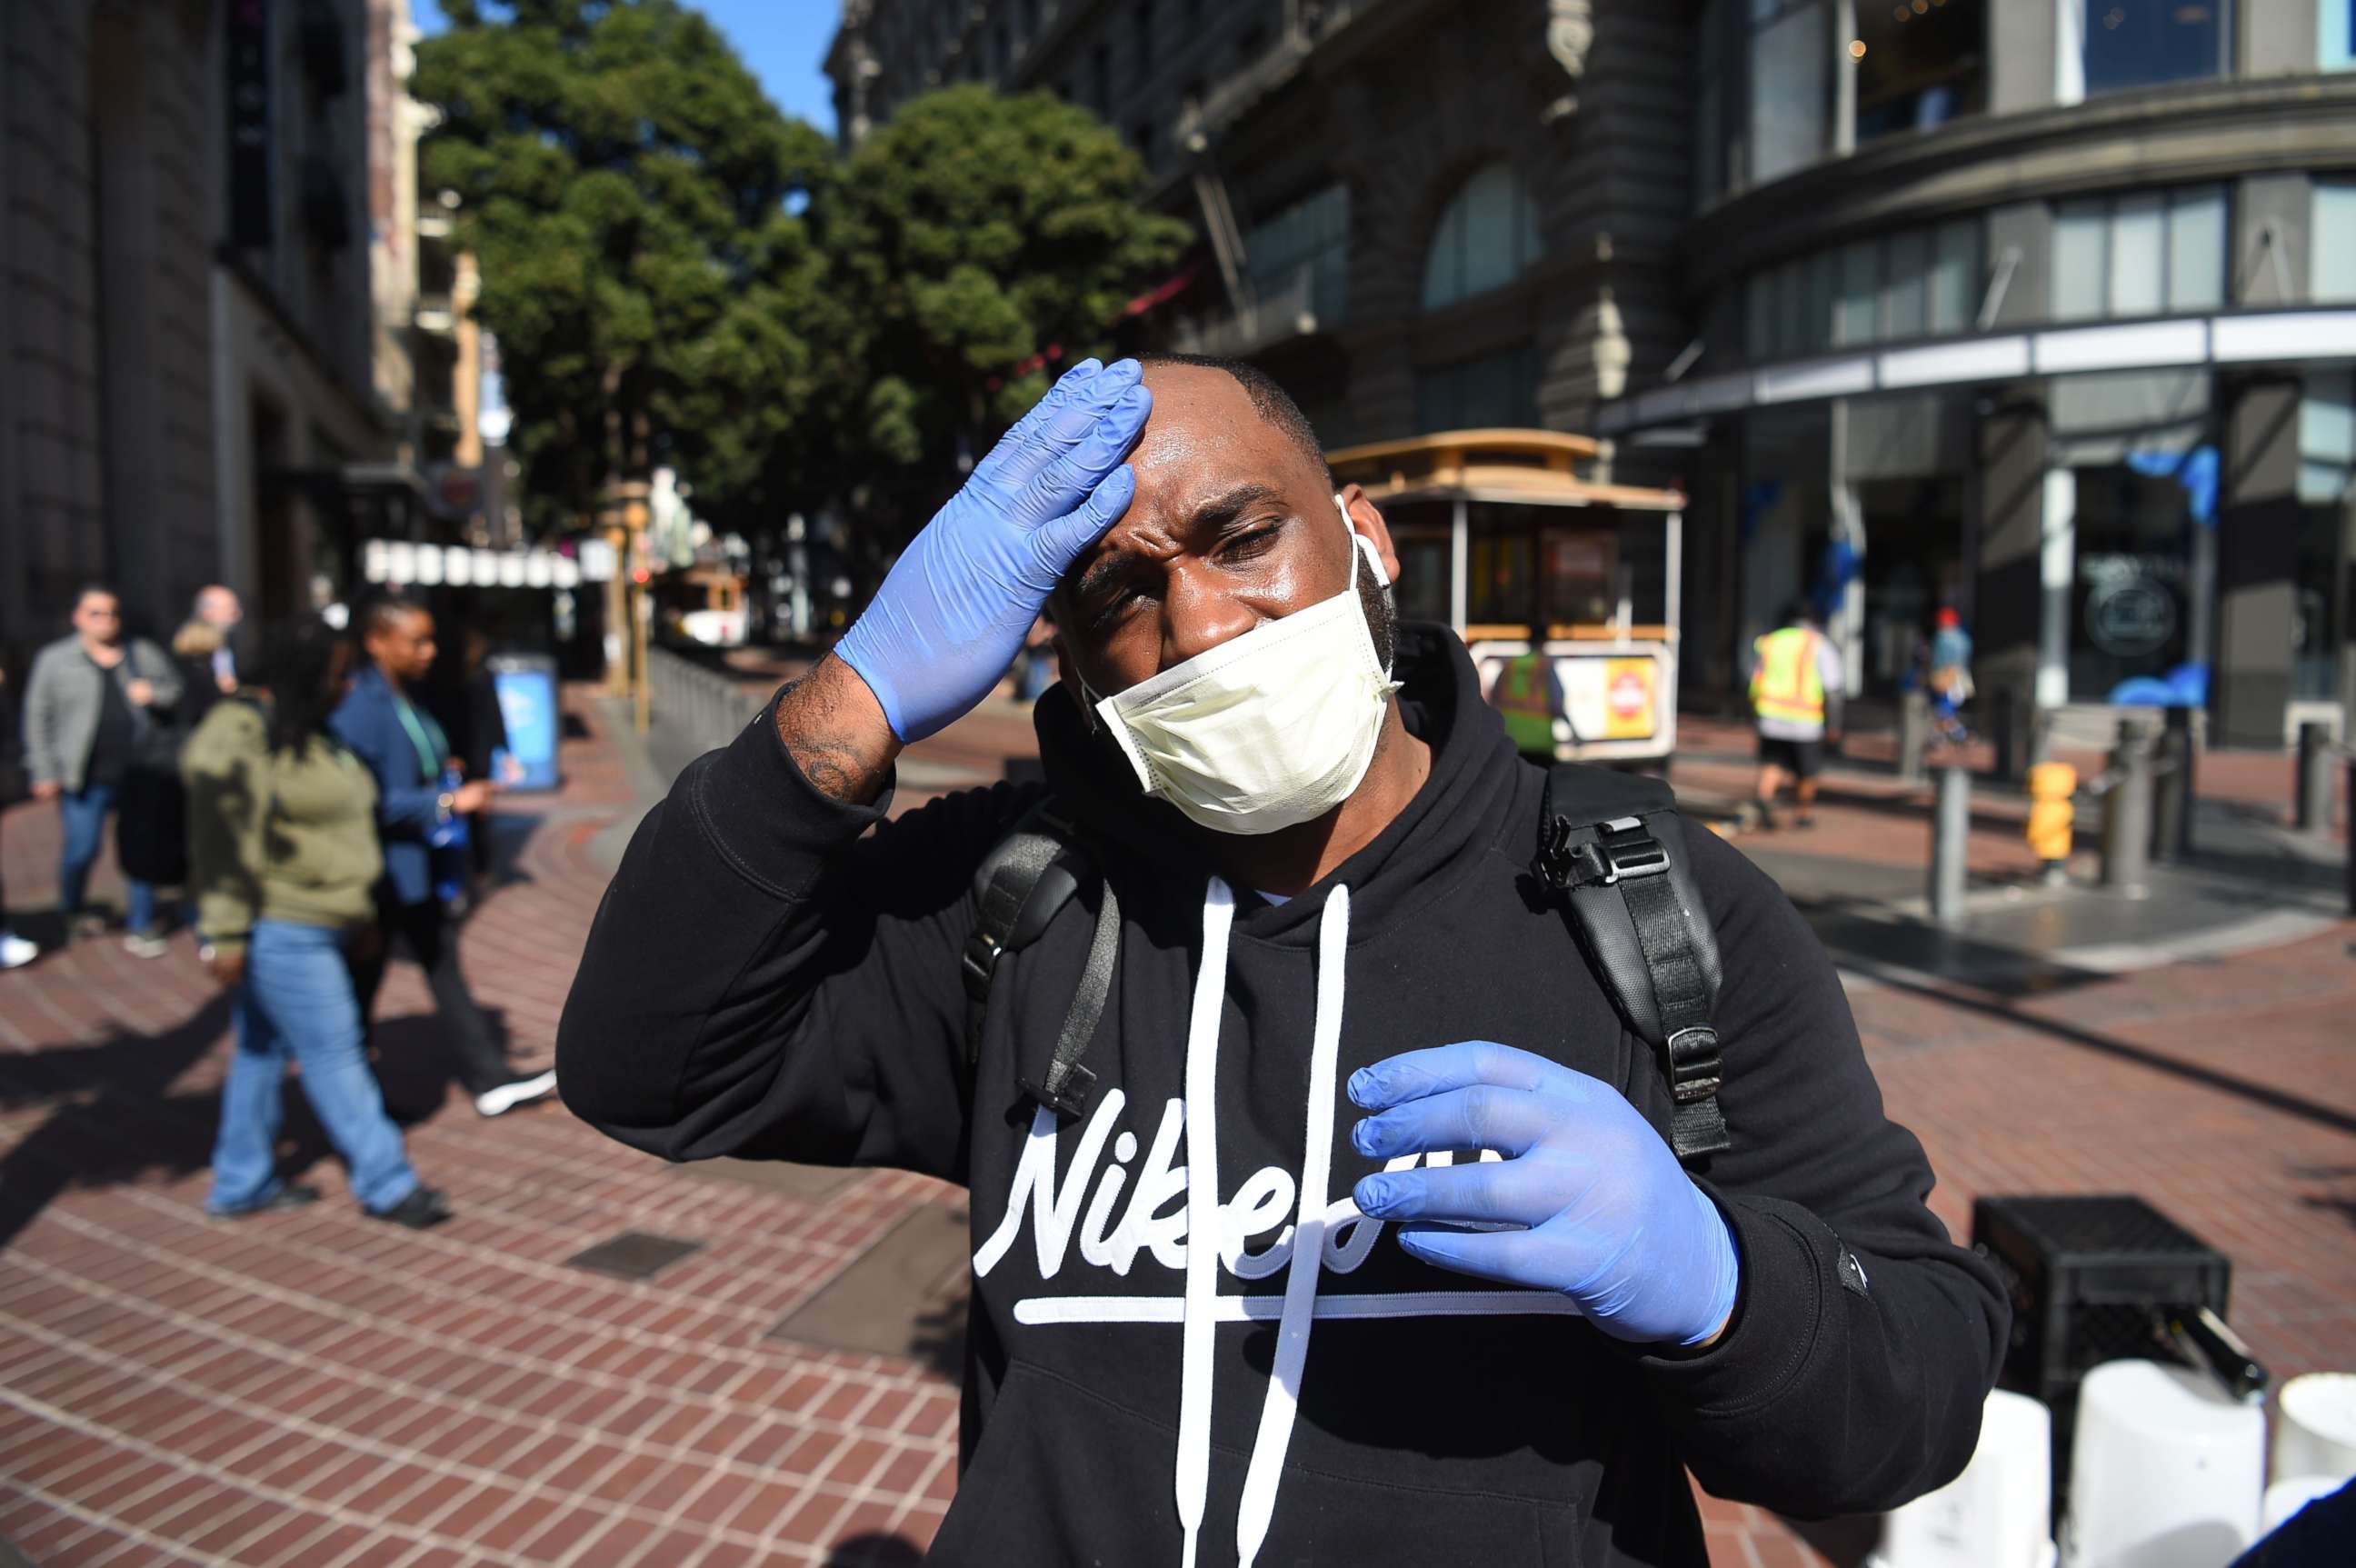 PHOTO: Cameron Nightingale adjusts his mask and gloves, a precaution to protect himself from  coronavirus, in San Francisco on Feb. 27, 2020.